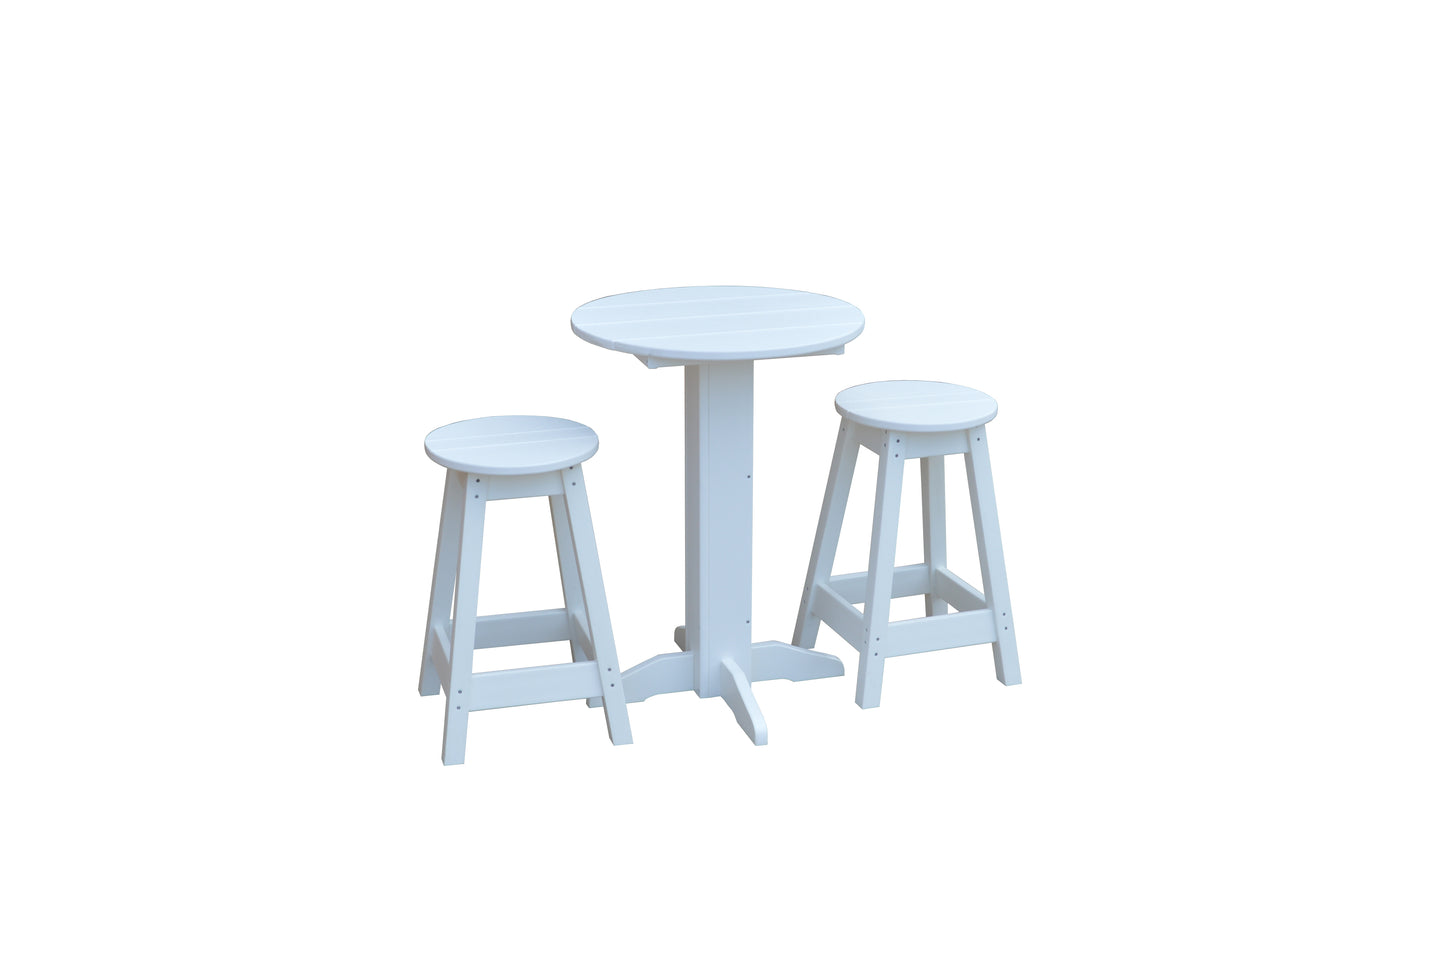 A&L Furniture Co. Recycled Plastic Round Bistro Stool Set - LEAD TIME TO SHIP 10 BUSINESS DAYS